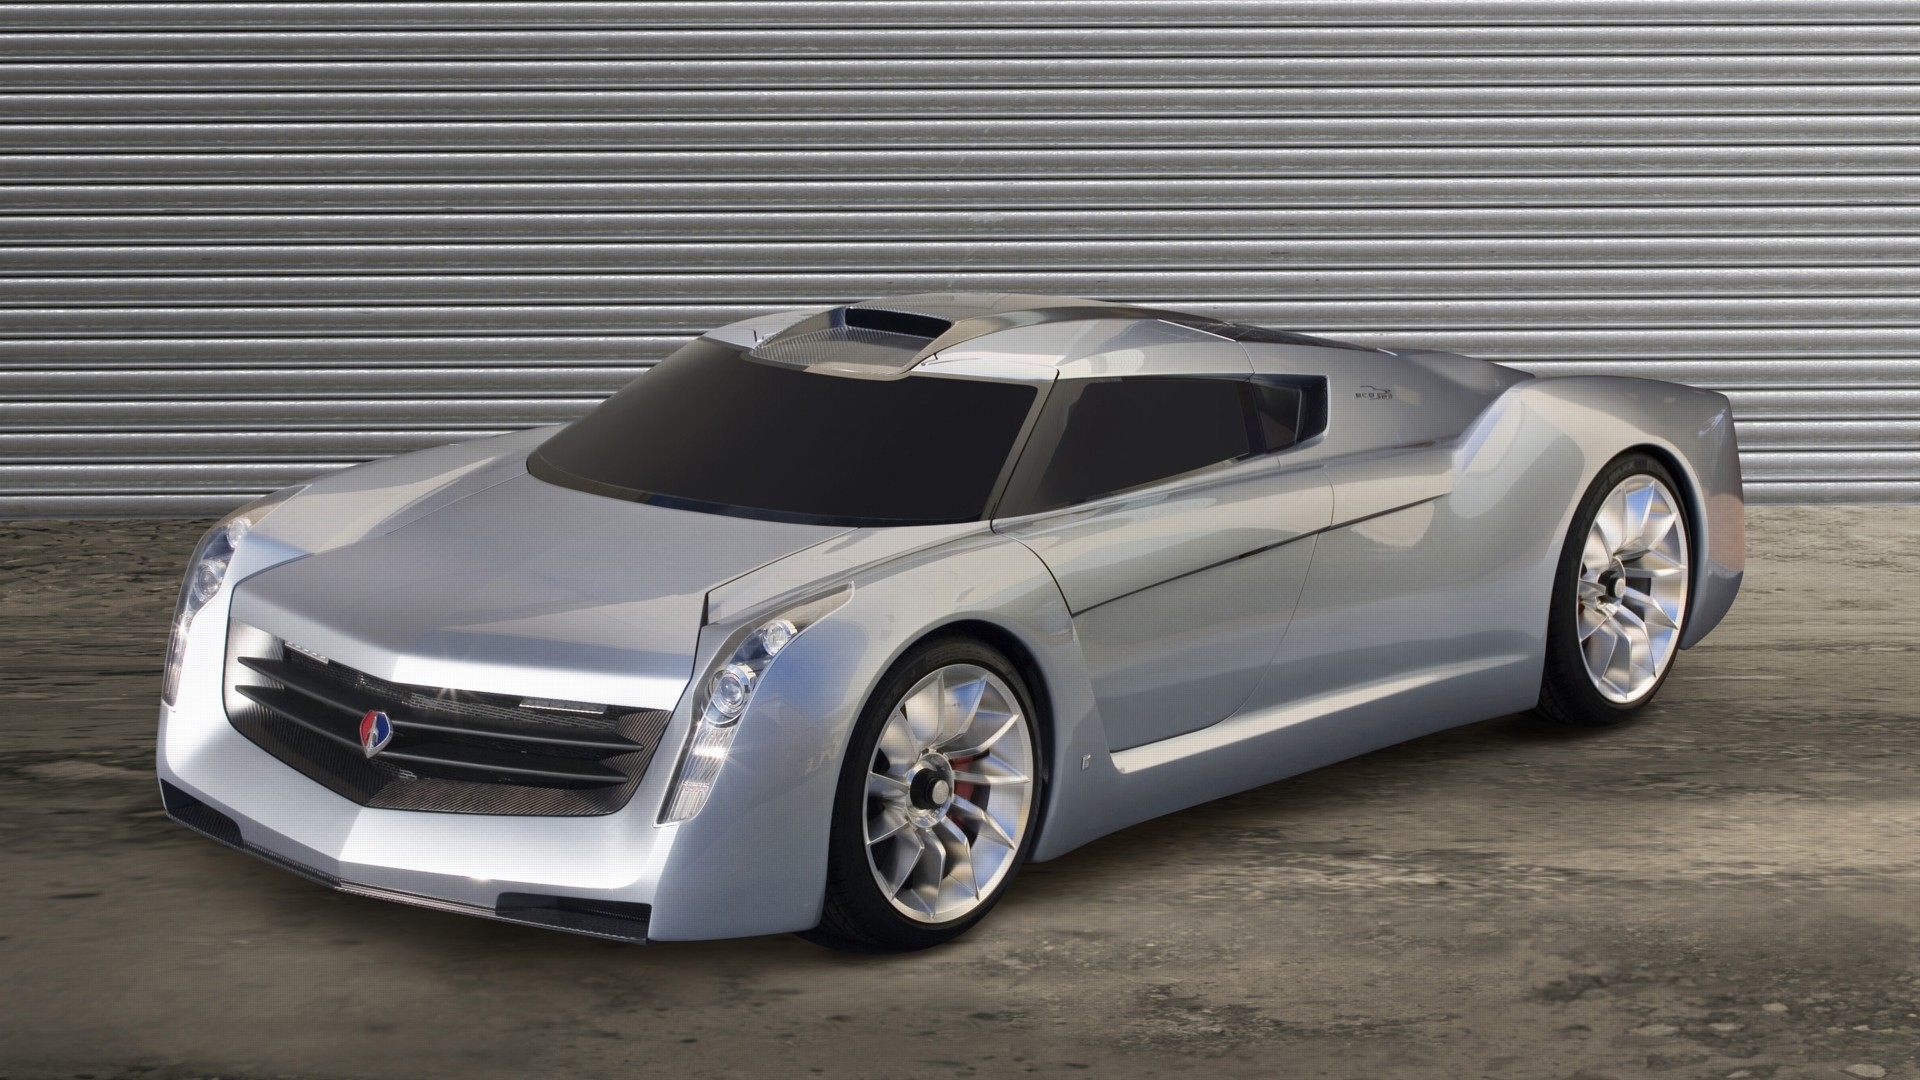 EcoJet, a stylish Cadillac vehicle, perfect for desktop wallpapers.